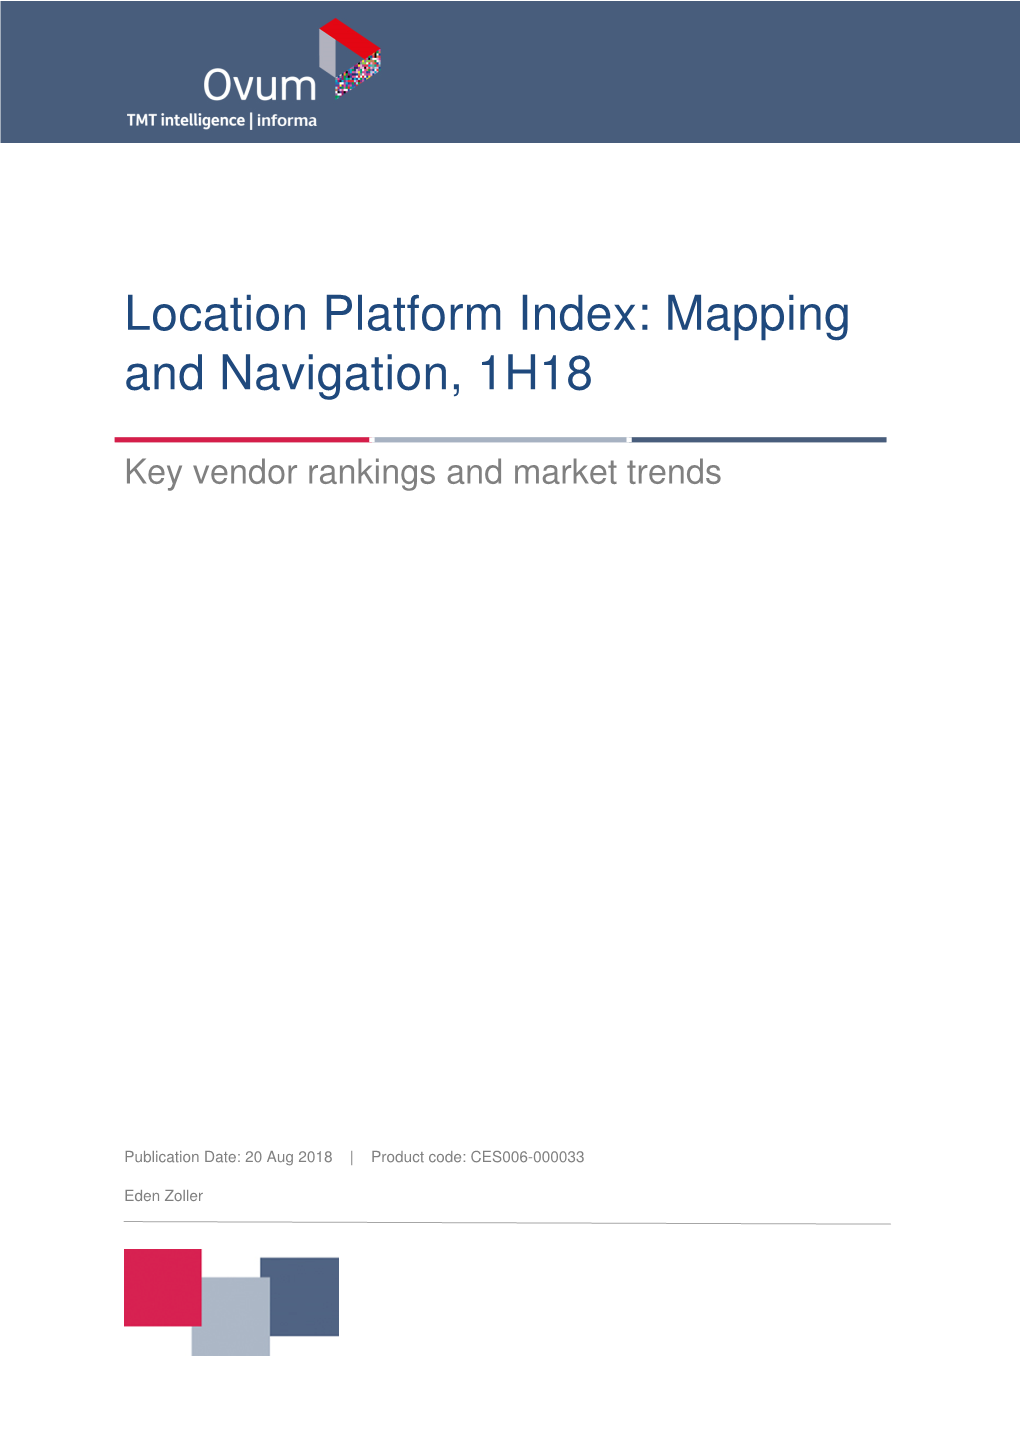 Location Platform Index: Mapping and Navigation, 1H18